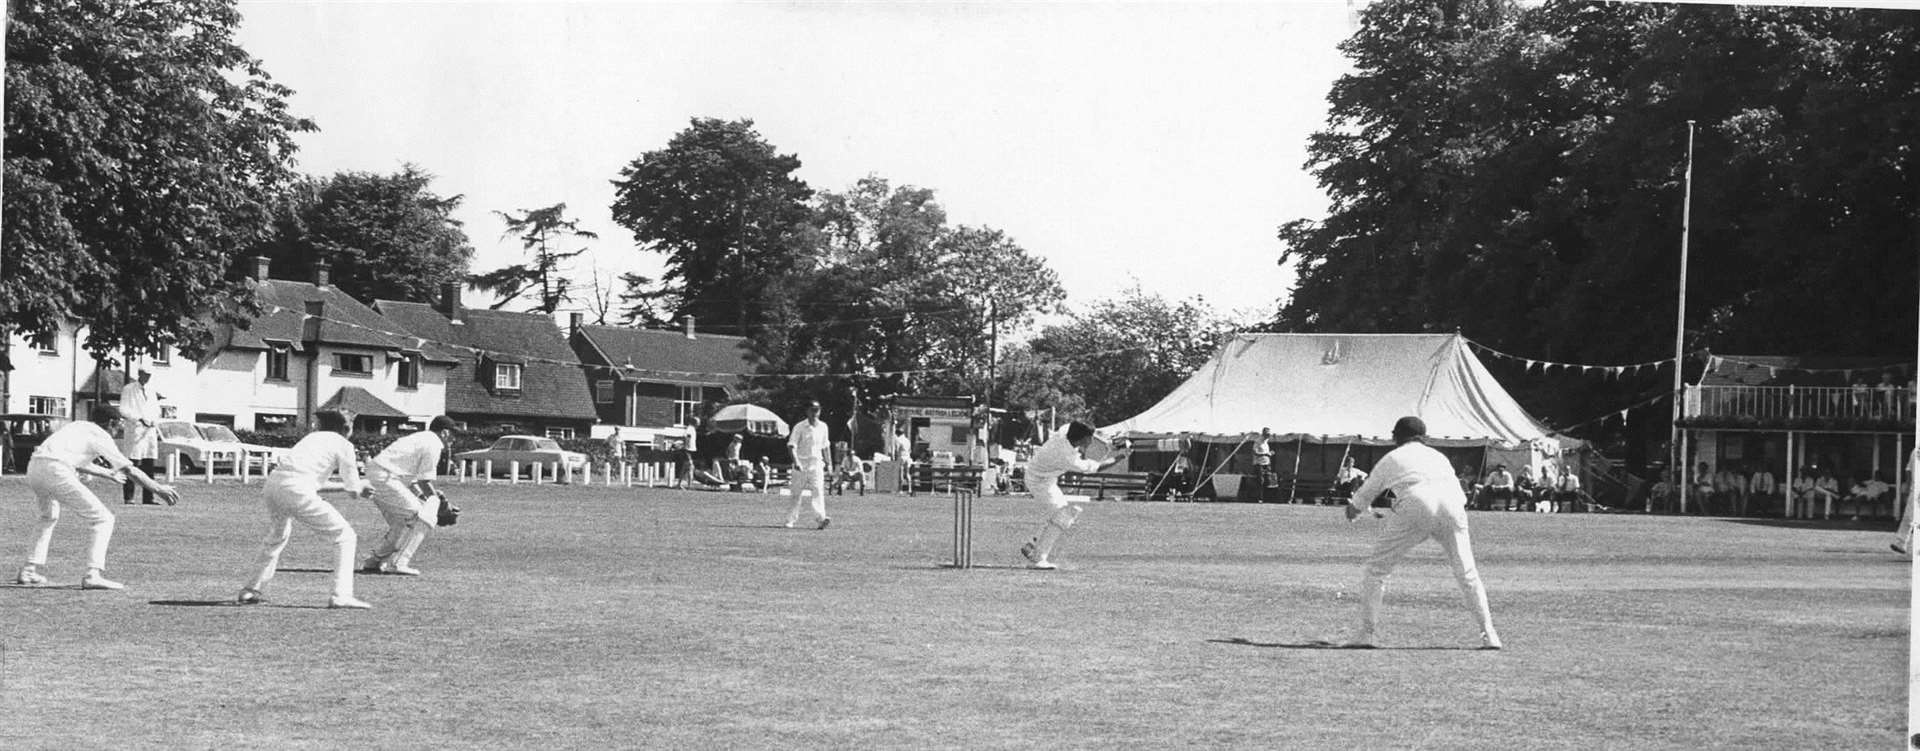 Cricket being played on Meopham Village Green, Kent during the hottest days